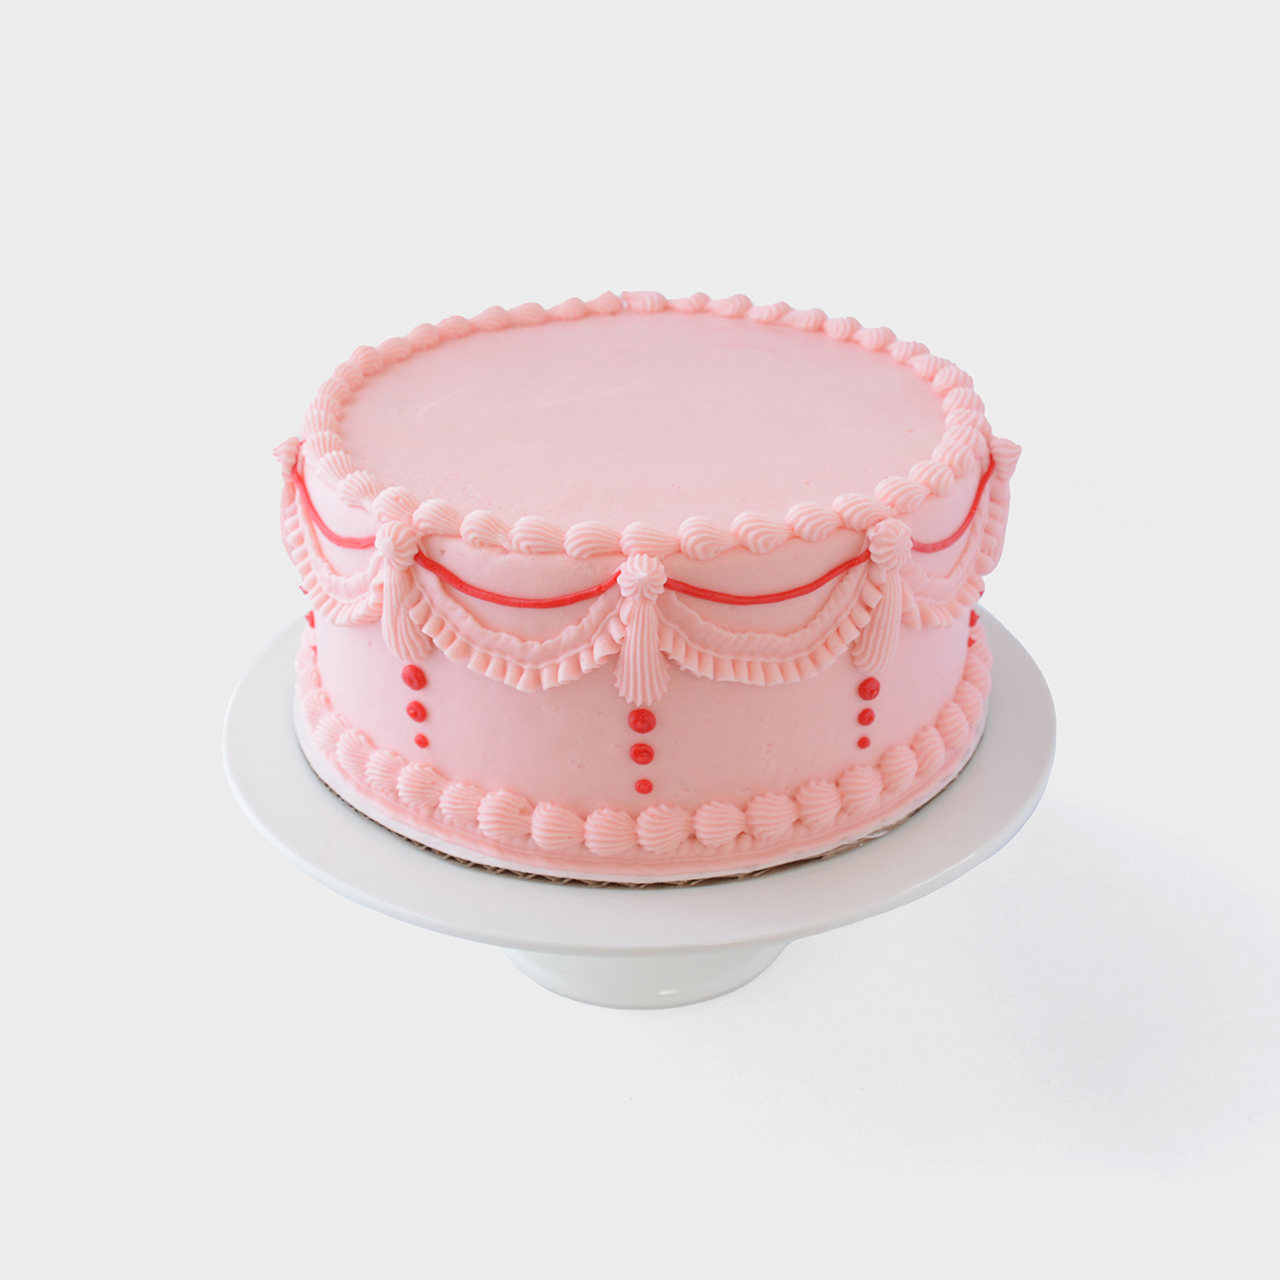 Vintage cake design with pink buttercream and red accents